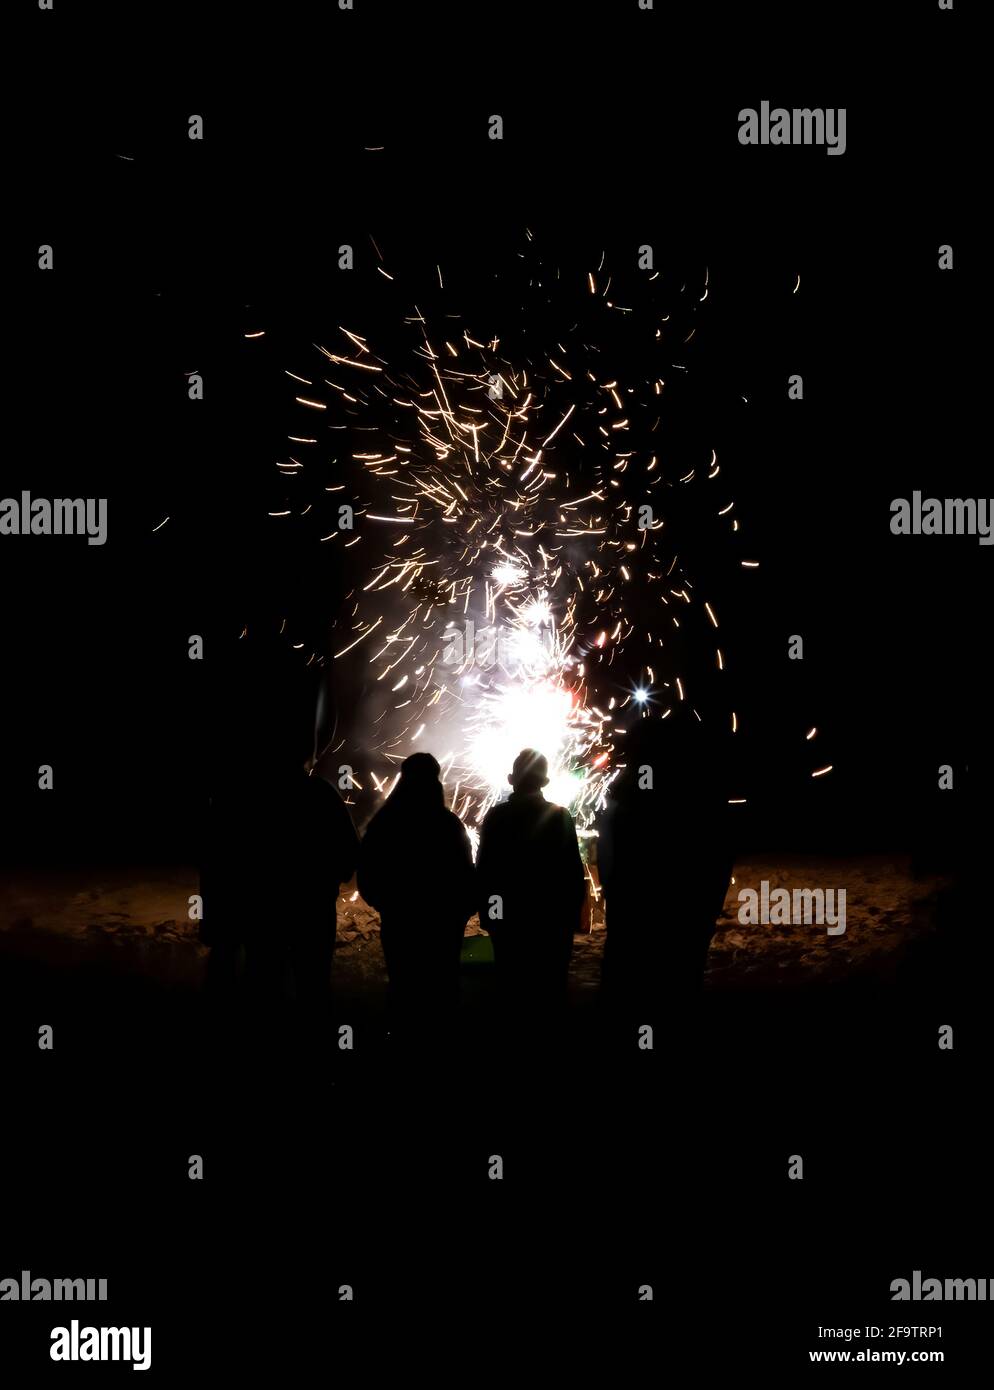 Group of people with back to camera in silhouette have a close up view of fireworks exploding on beach in black night. Stock Photo